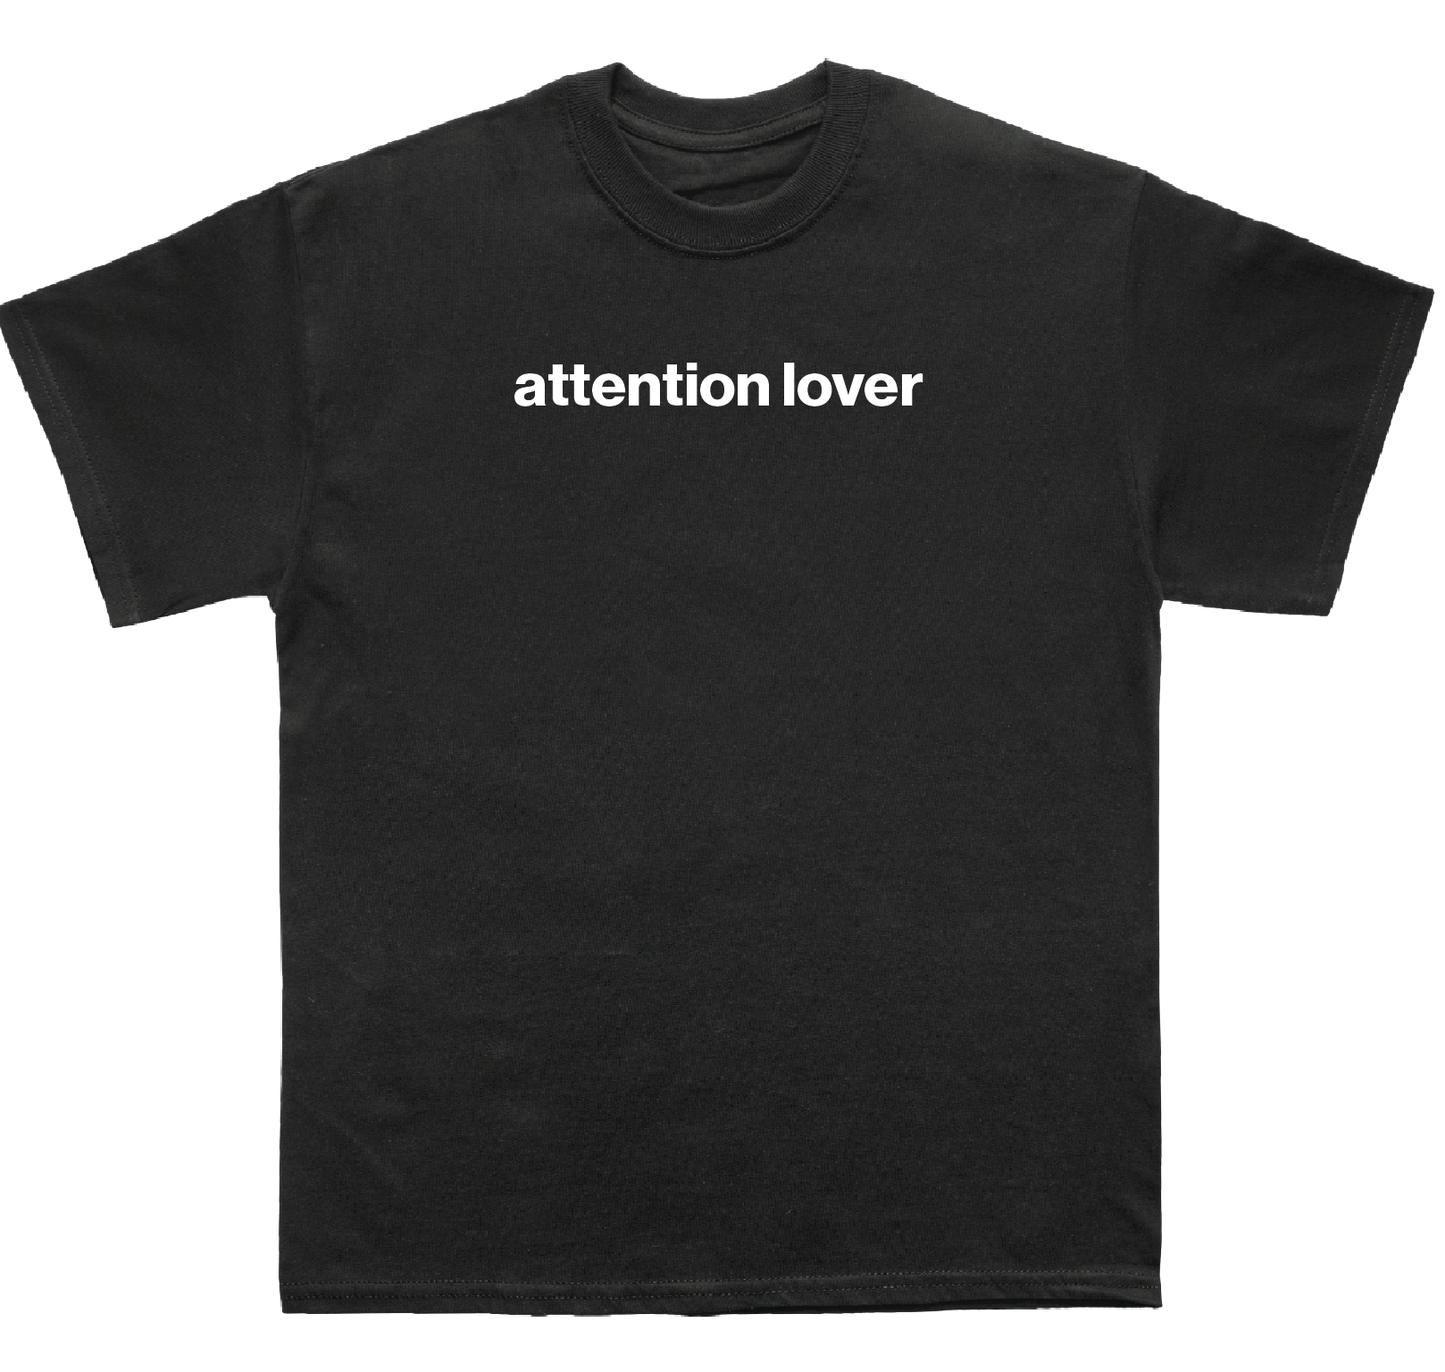 attention lover shirt